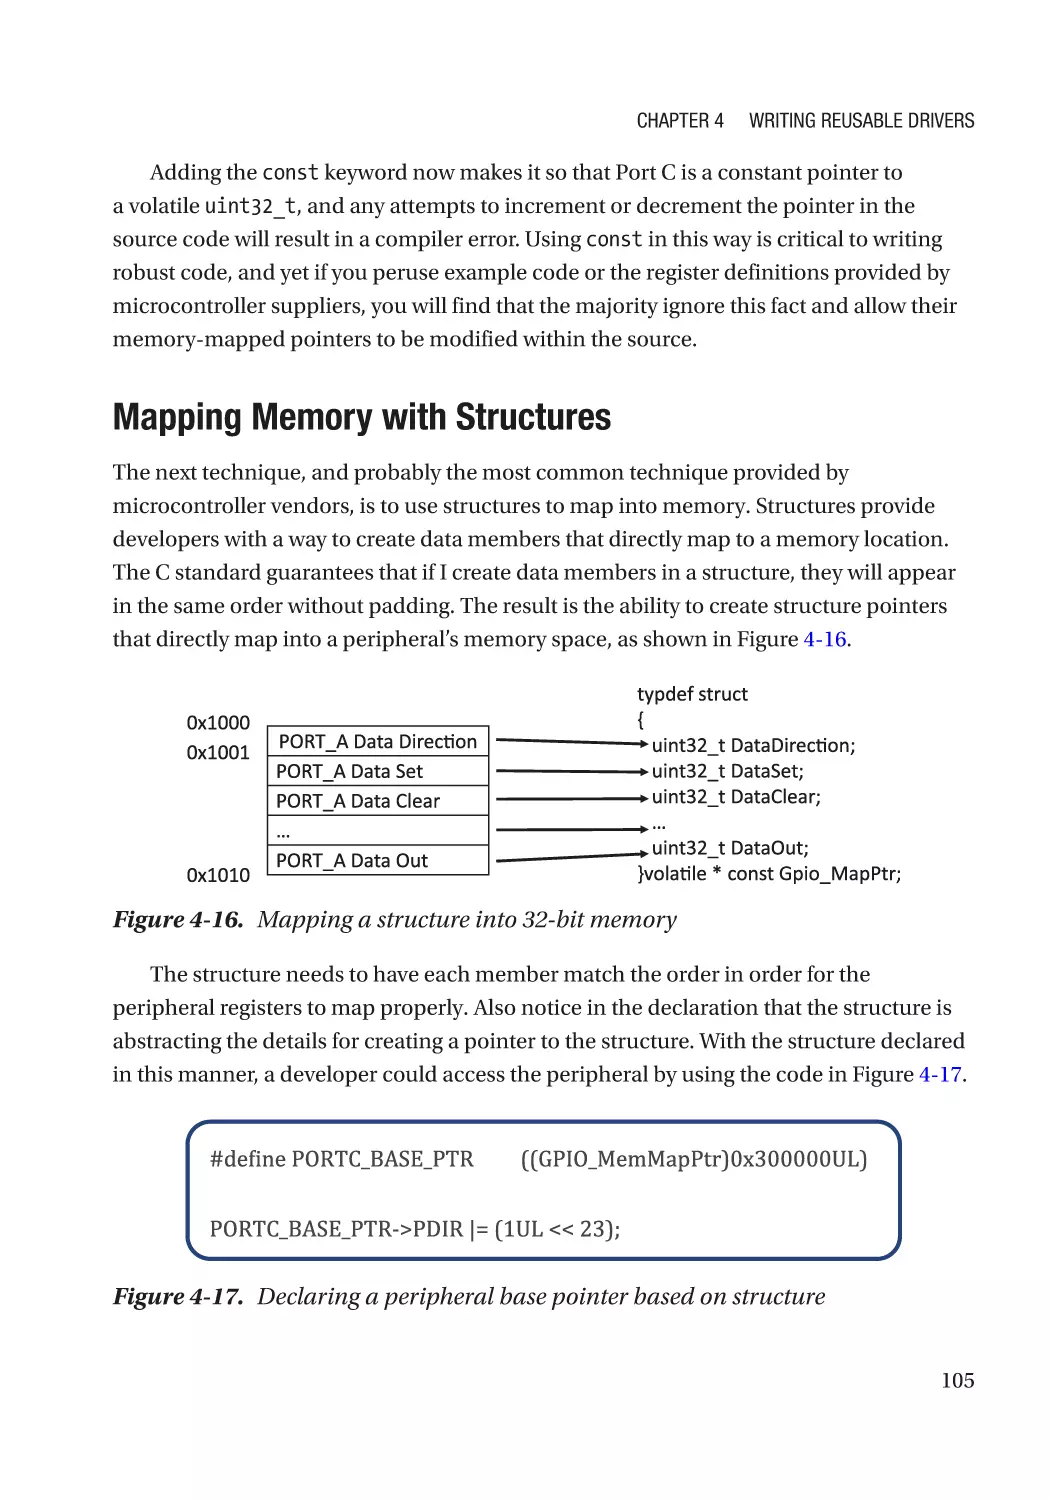 Mapping Memory with Structures